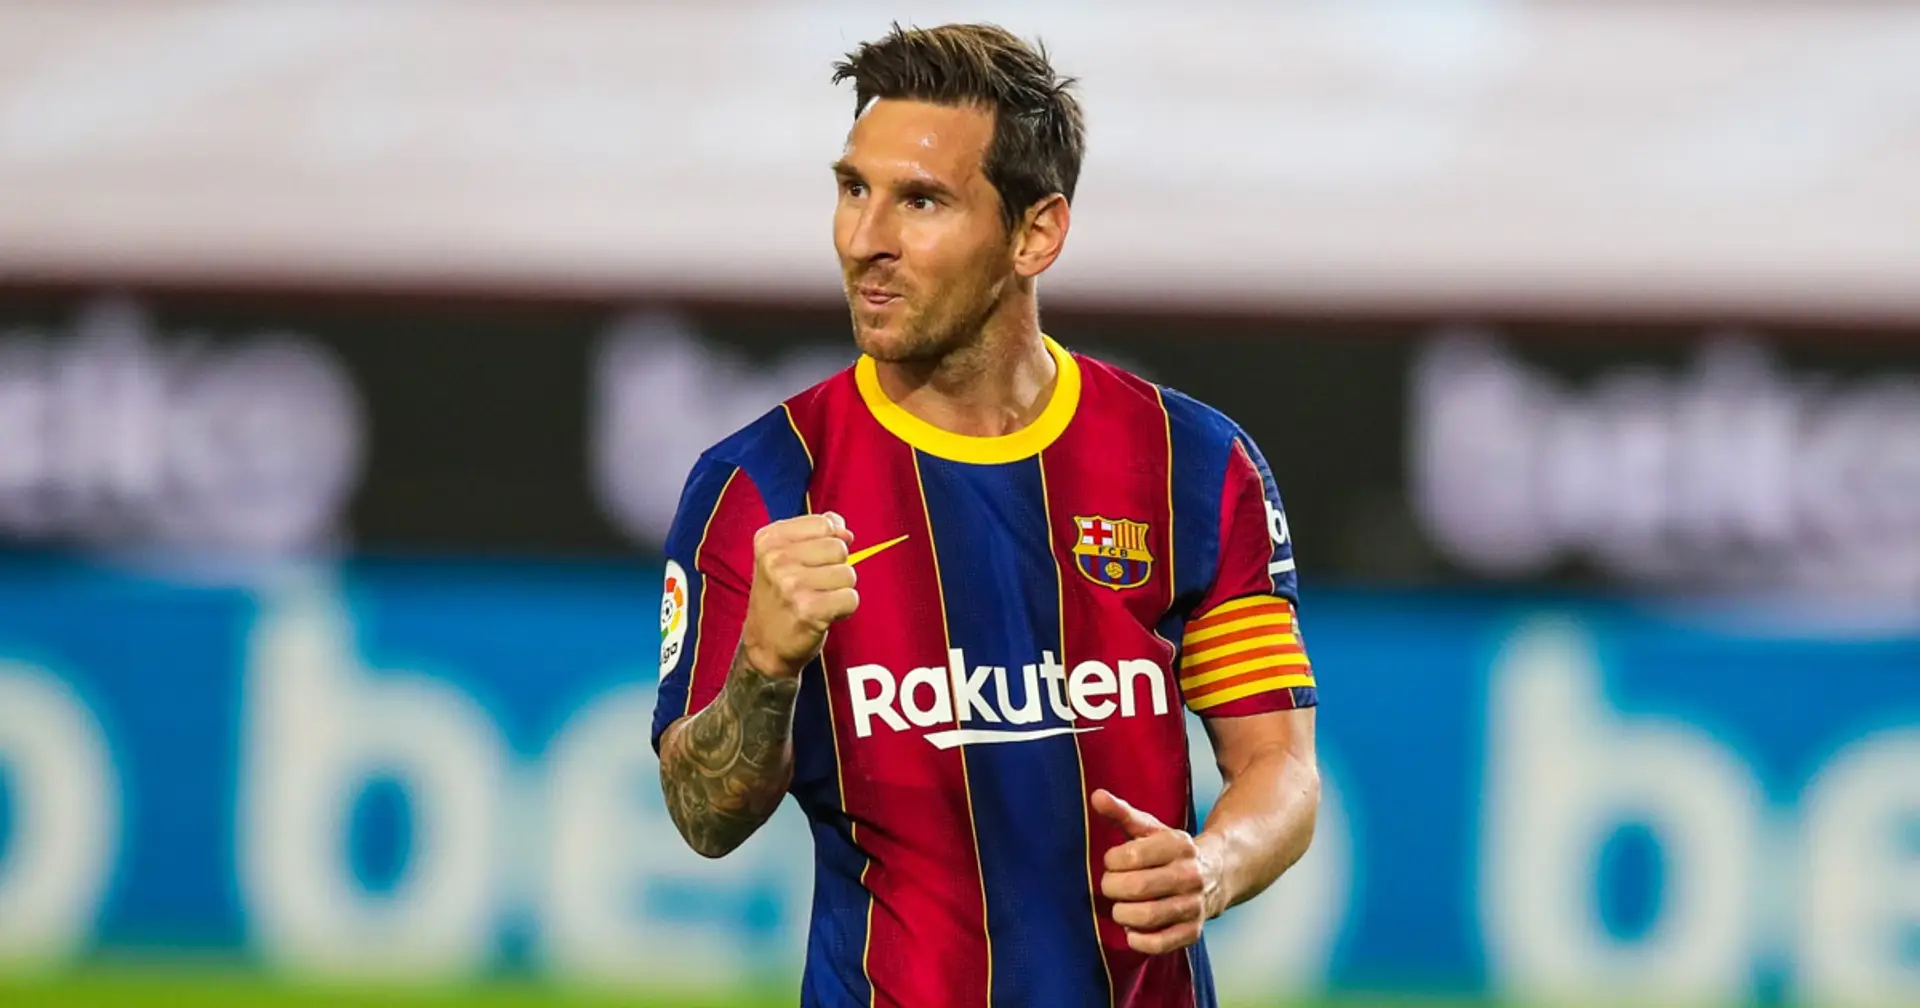 Lionel Messi on the brink of mind-blowing goalscoring record ahead of Valladolid encounter